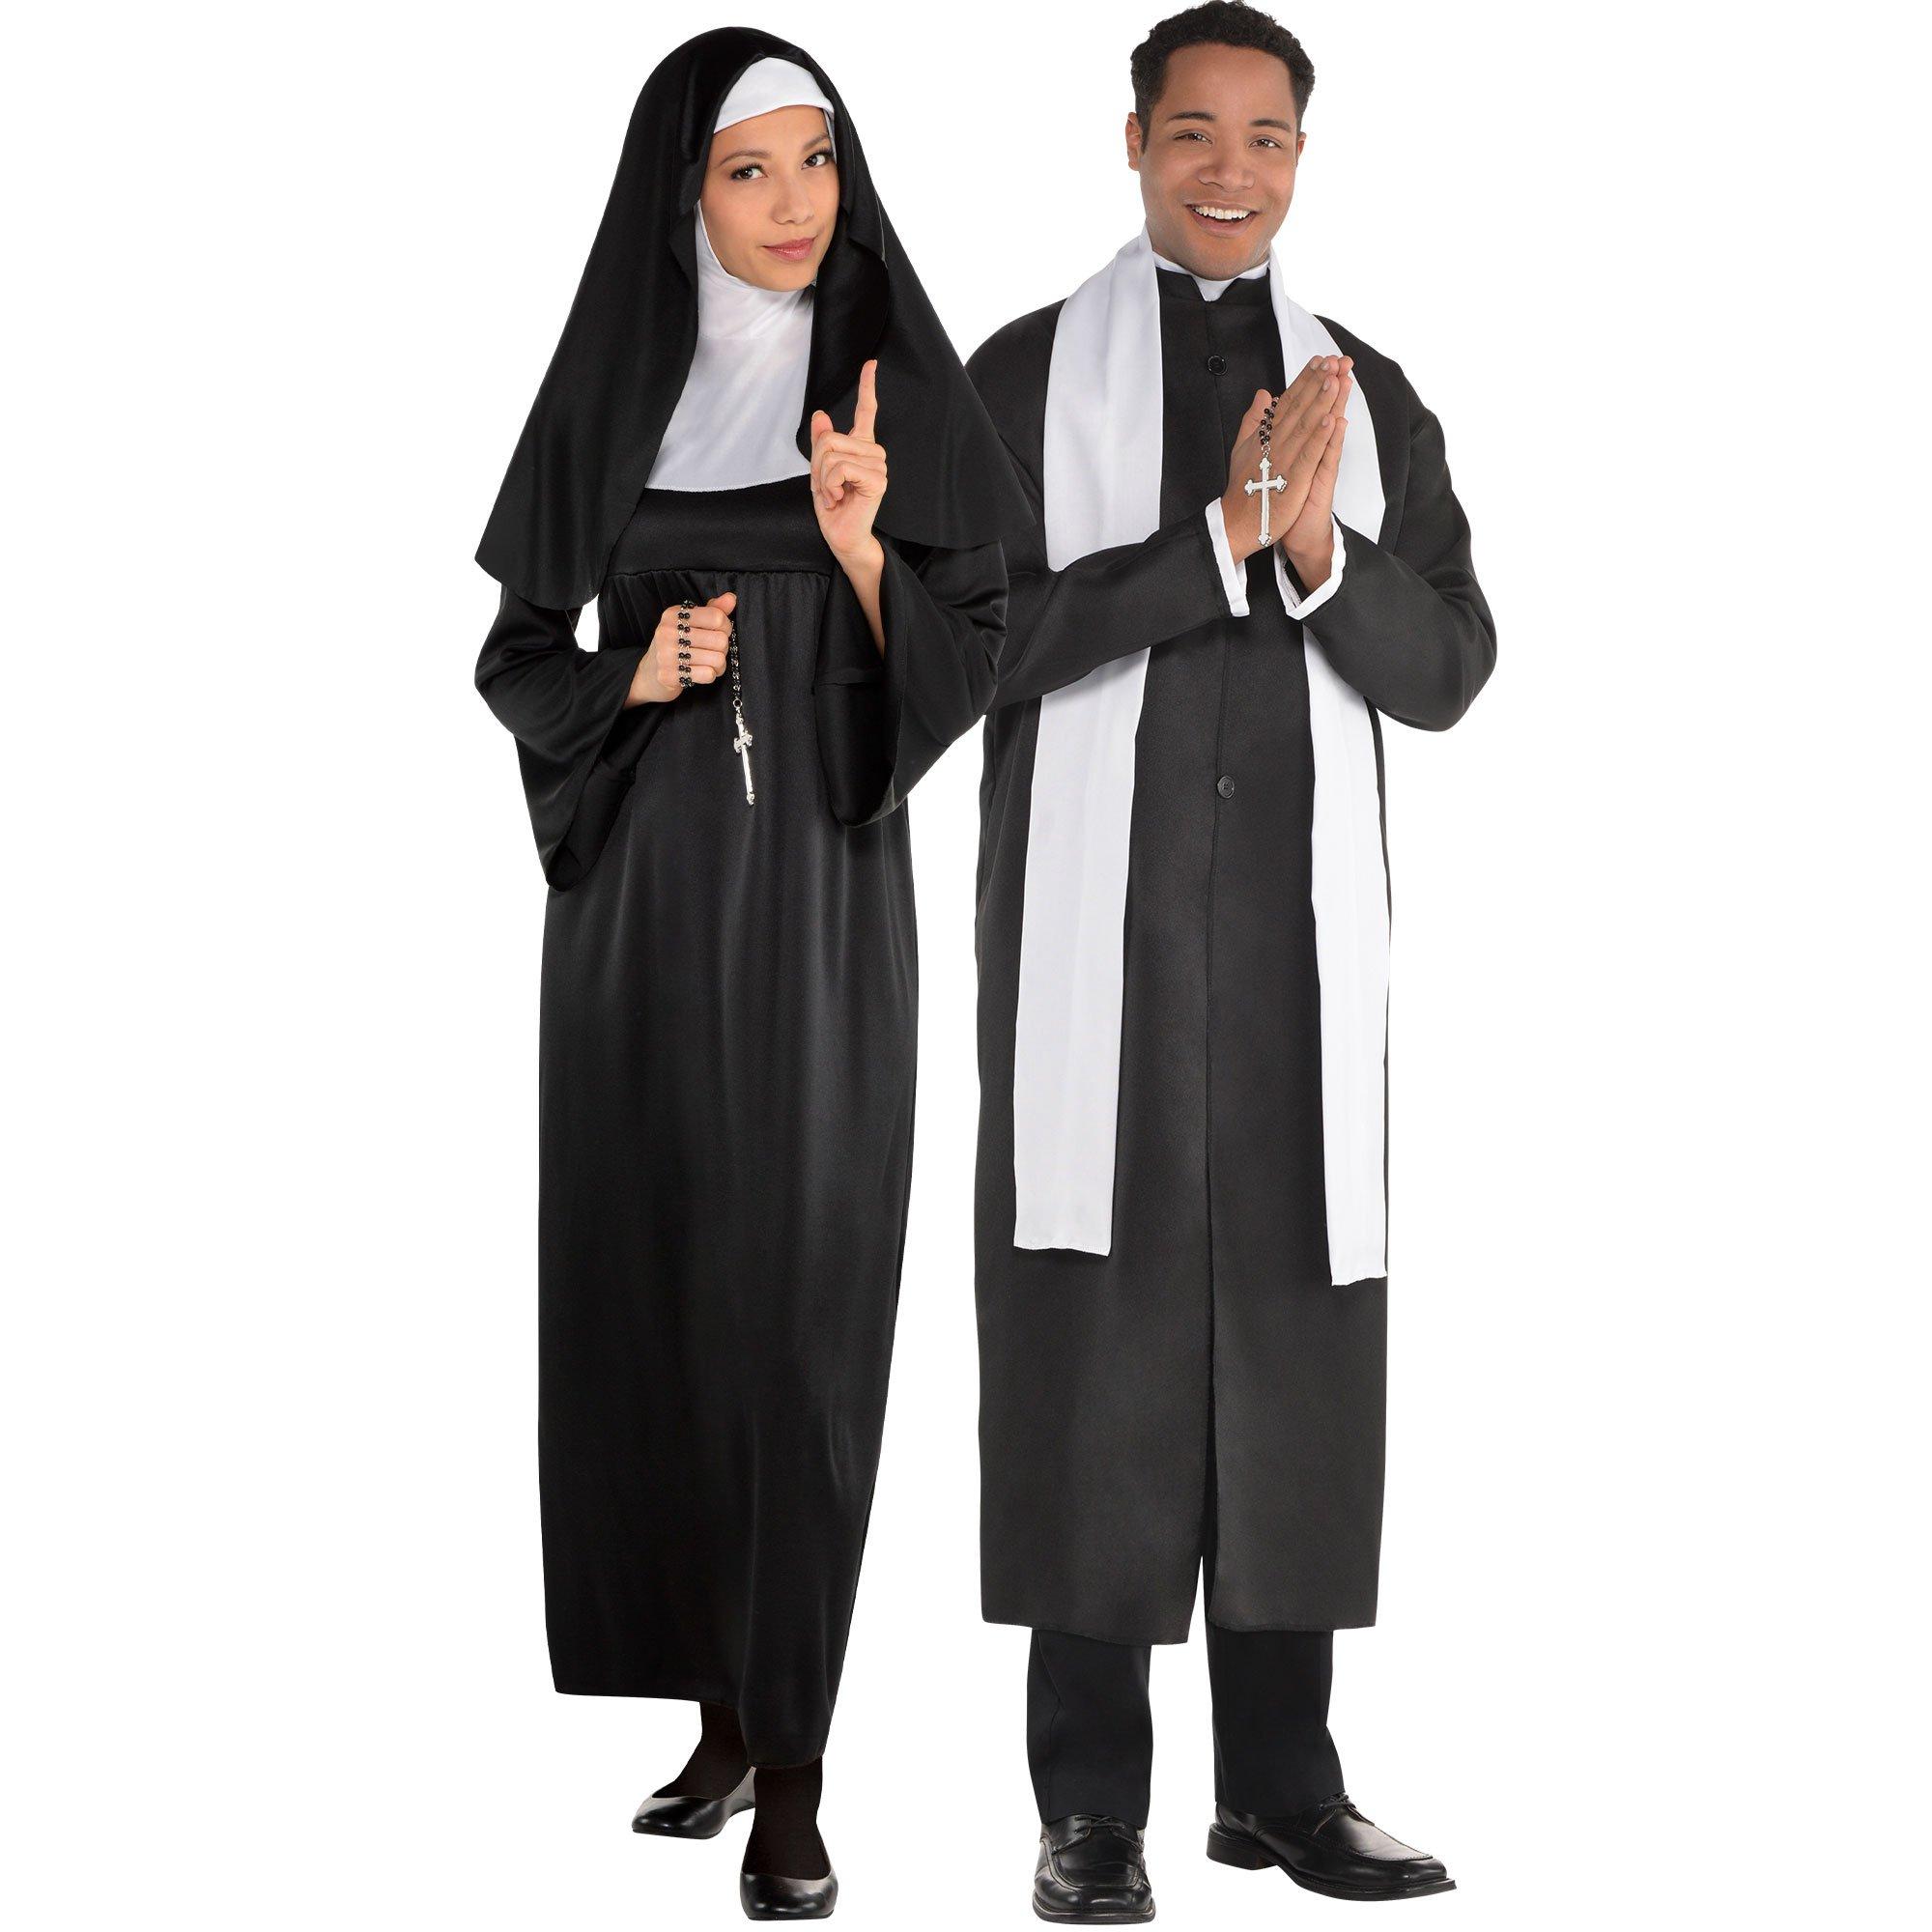 The Holy Couple Couples Costume Party City